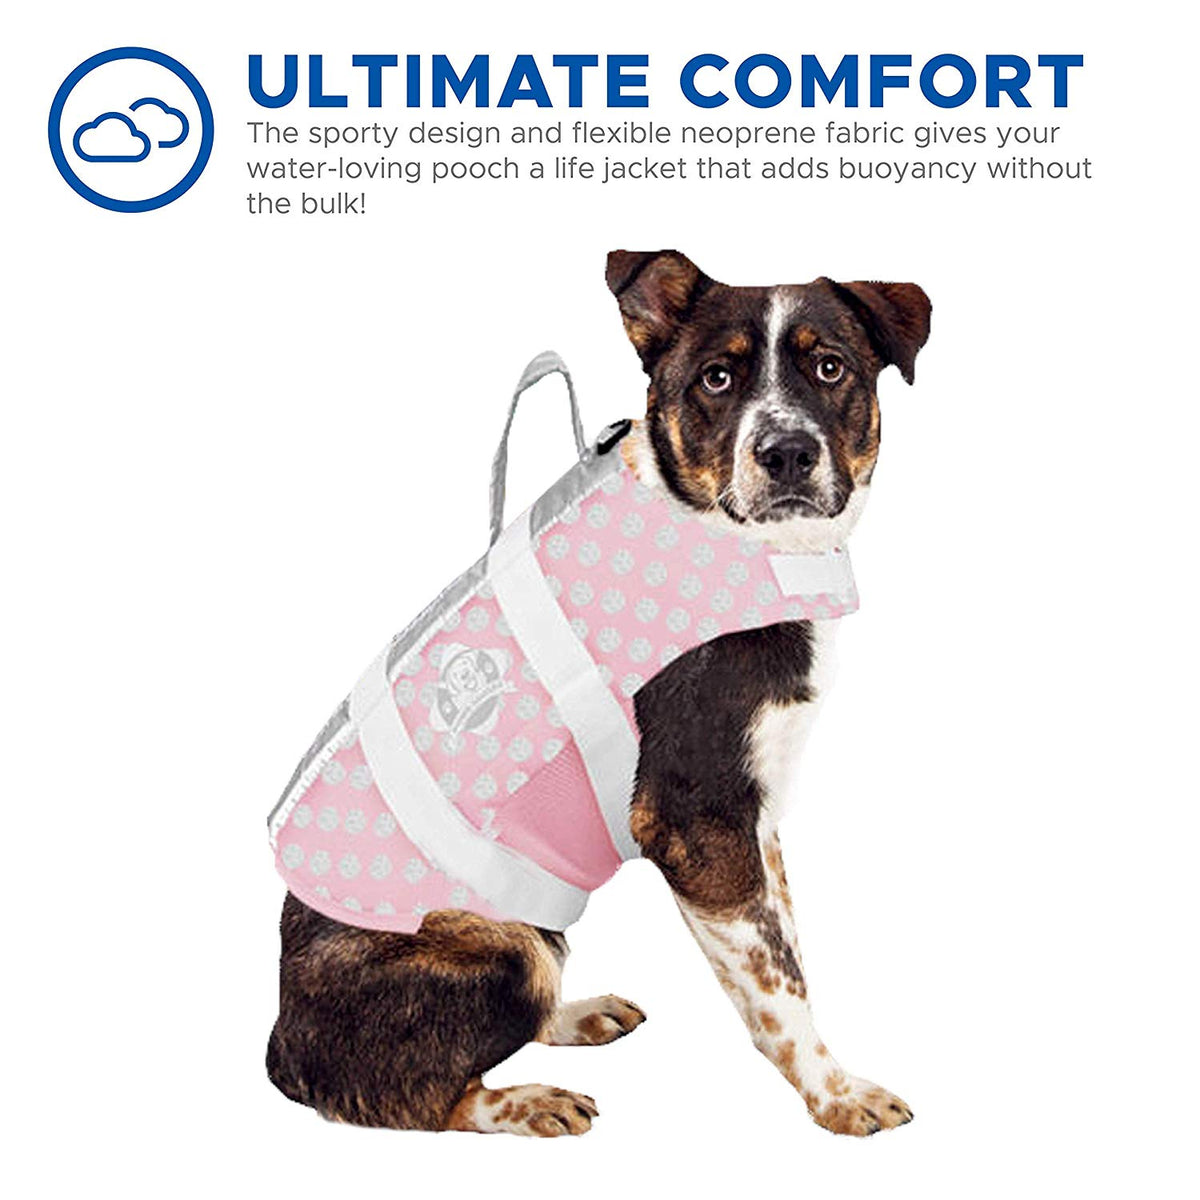 Paws Aboard Pink and Grey Pet Life Vest - 3 Red Rovers